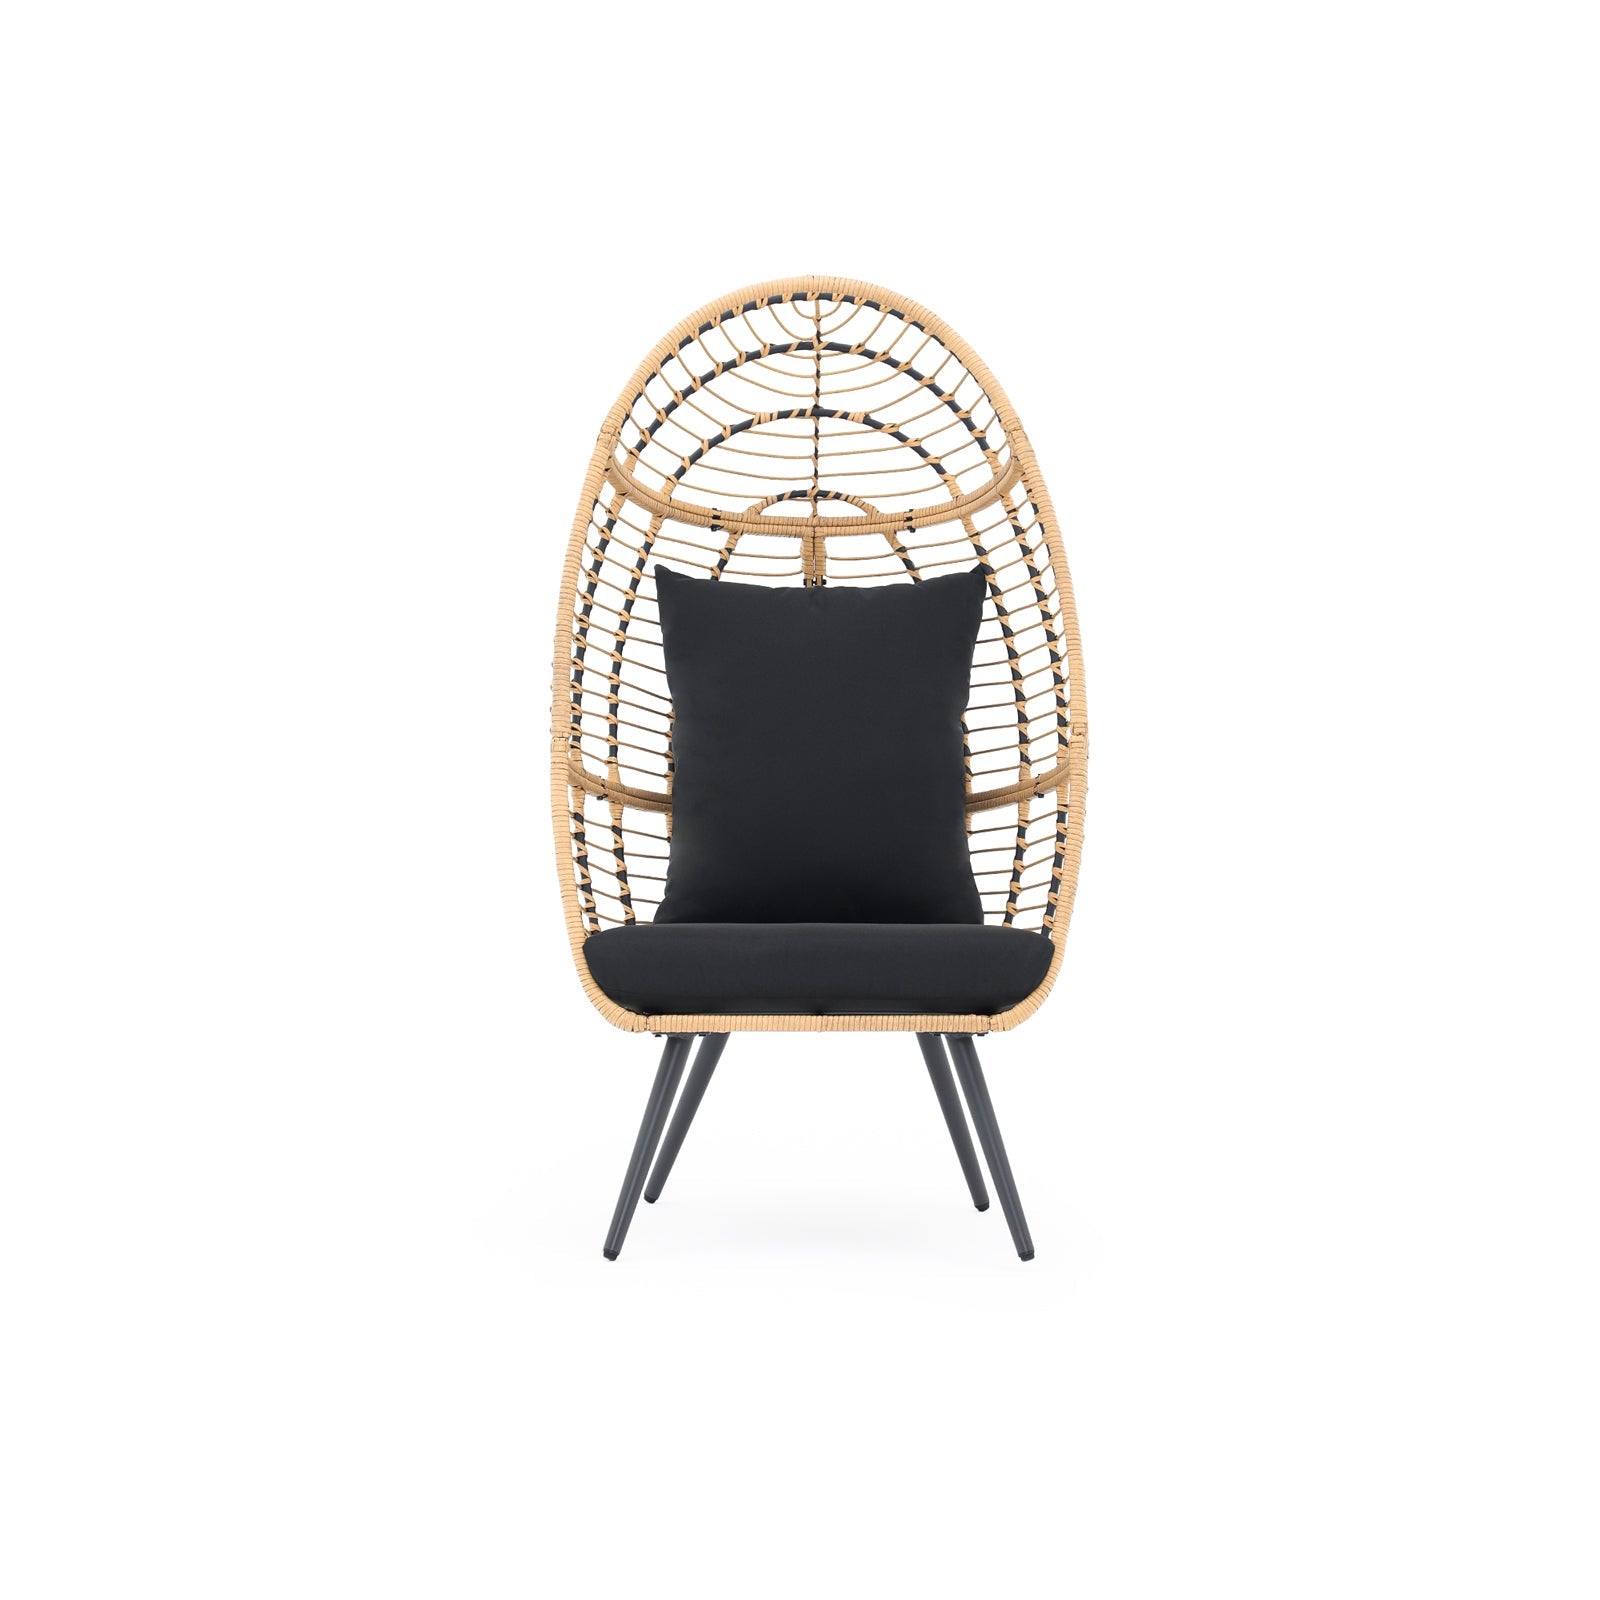 Oia Egg Chair with 4 metal legs stands, Natural Rattan Design, black seat and back cushions, front view - Jardina Furniture#Color_Black